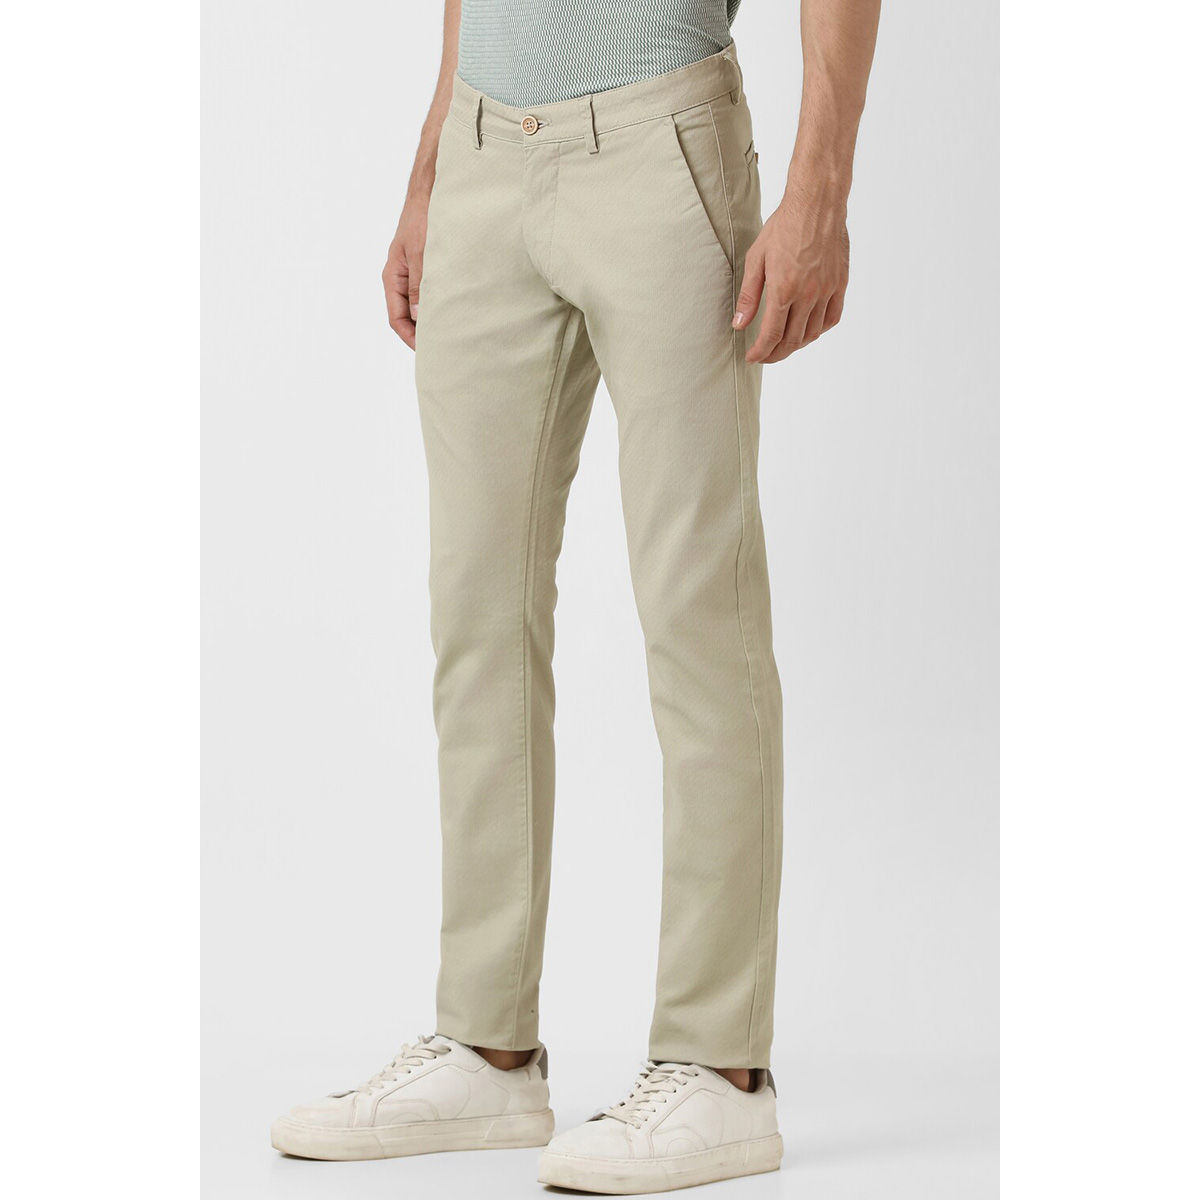 Peter England Casuals Trousers & Chinos, Peter England Beige Casual Trousers  for Men at Peterengland.com